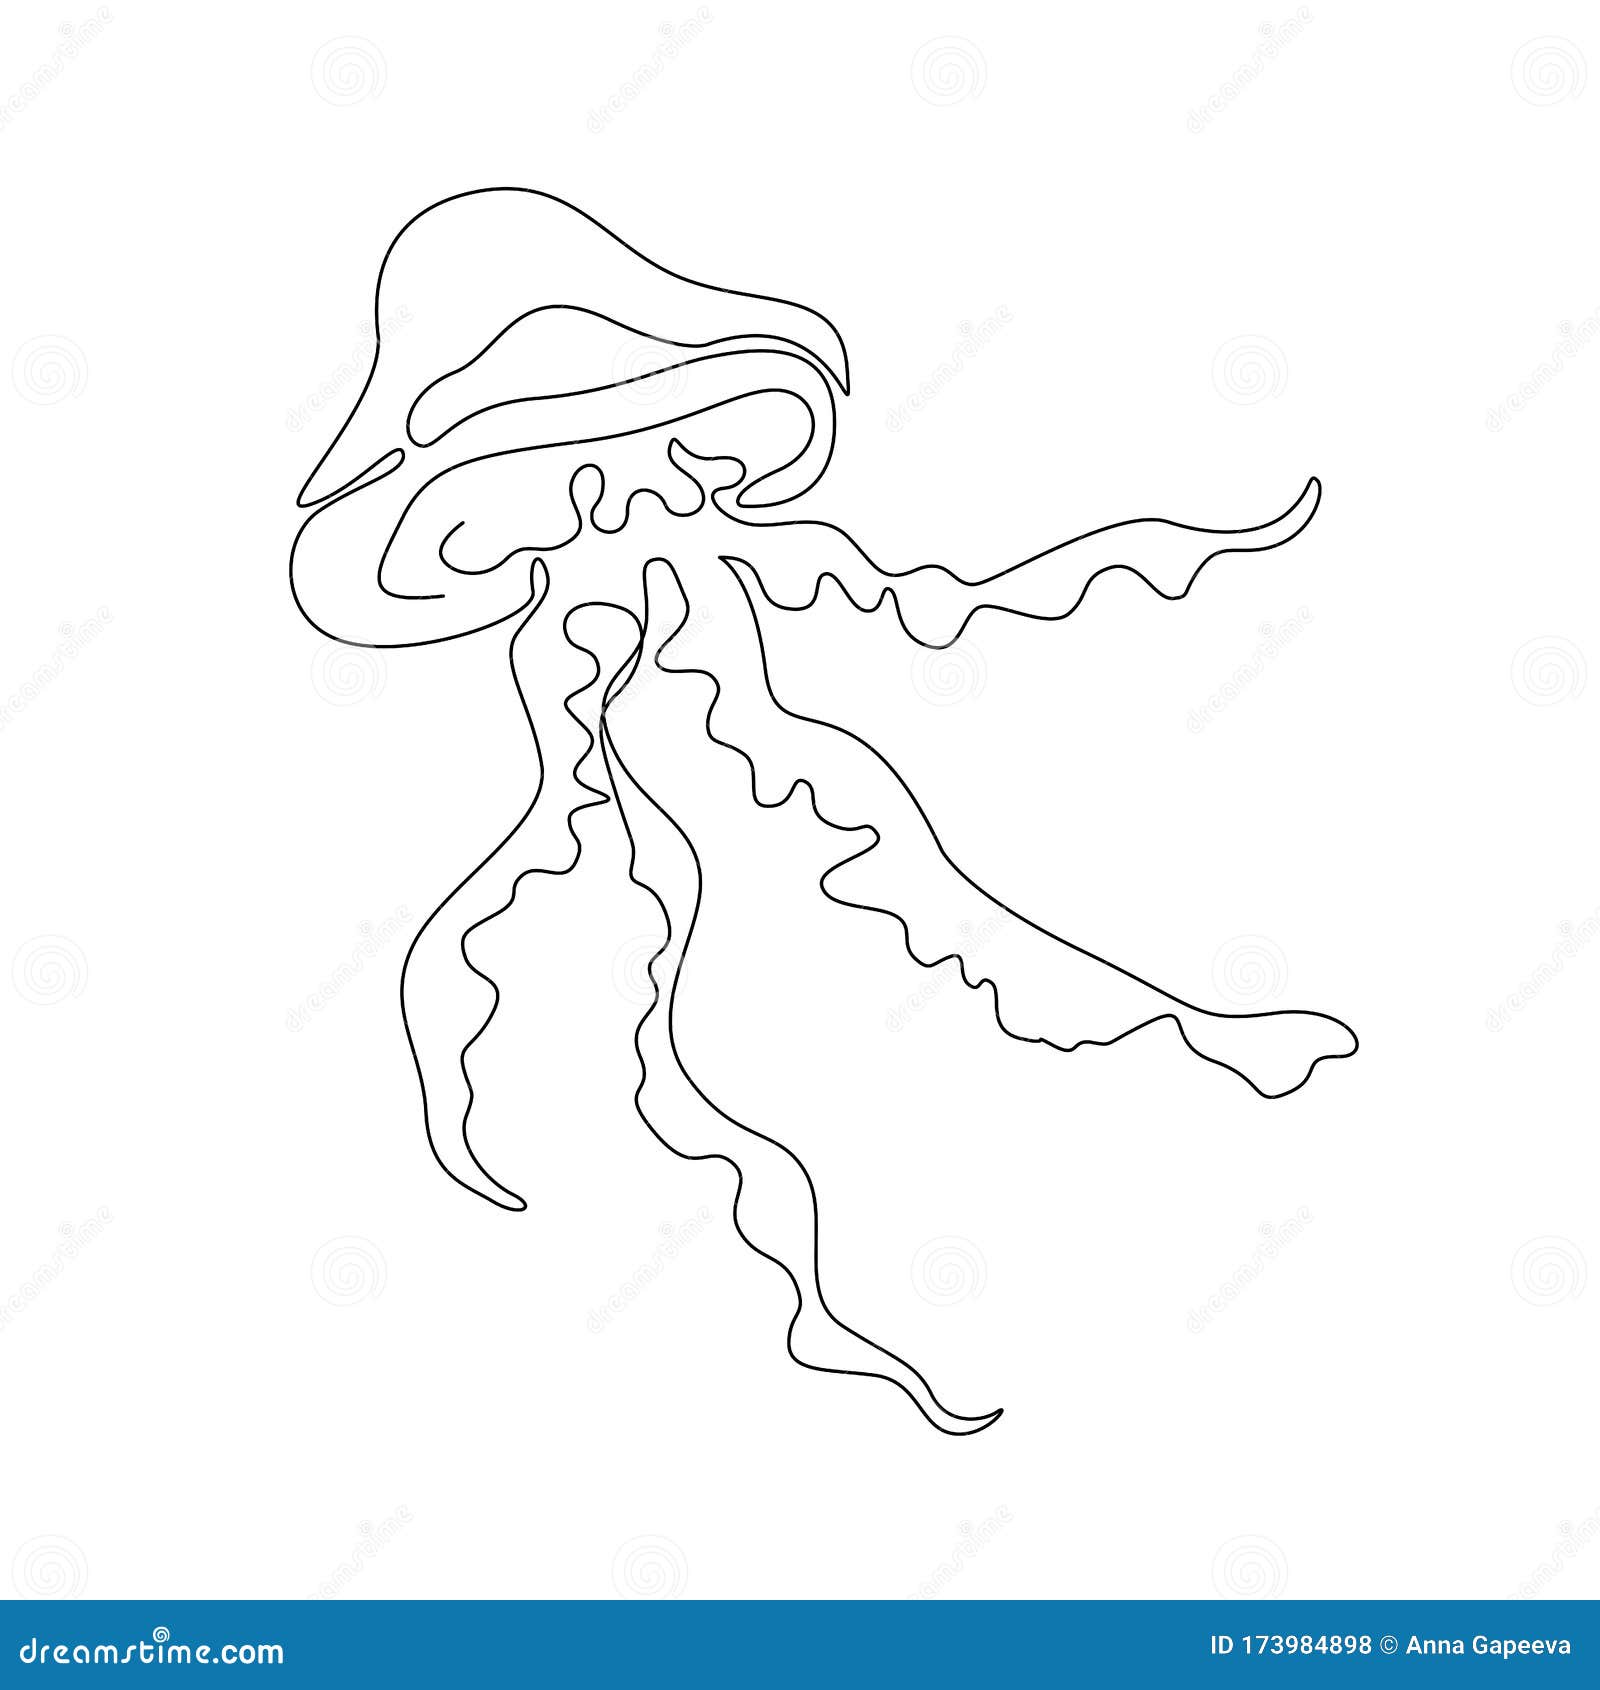 Line Art One Line Jellyfish For Decoration Design Stock Vector Illustration Of Icon Octopus 173984898